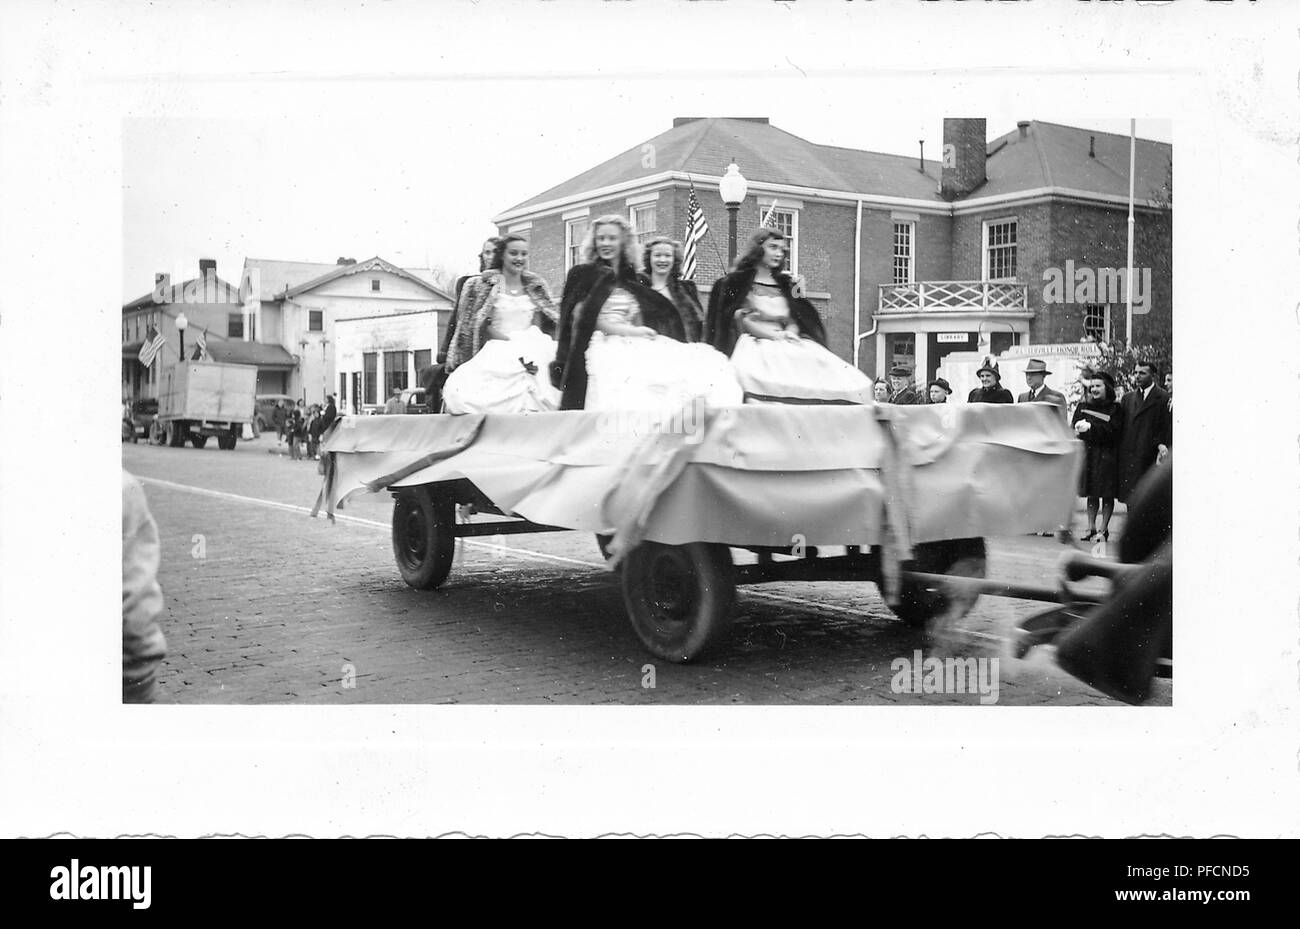 Black and white photograph, showing five girls, wearing ball gowns and fur coats, being pulled on an open parade float, with buildings, spectators, and American flags in the background, likely photographed in Ohio in the decade following World War II, 1945. () Stock Photo